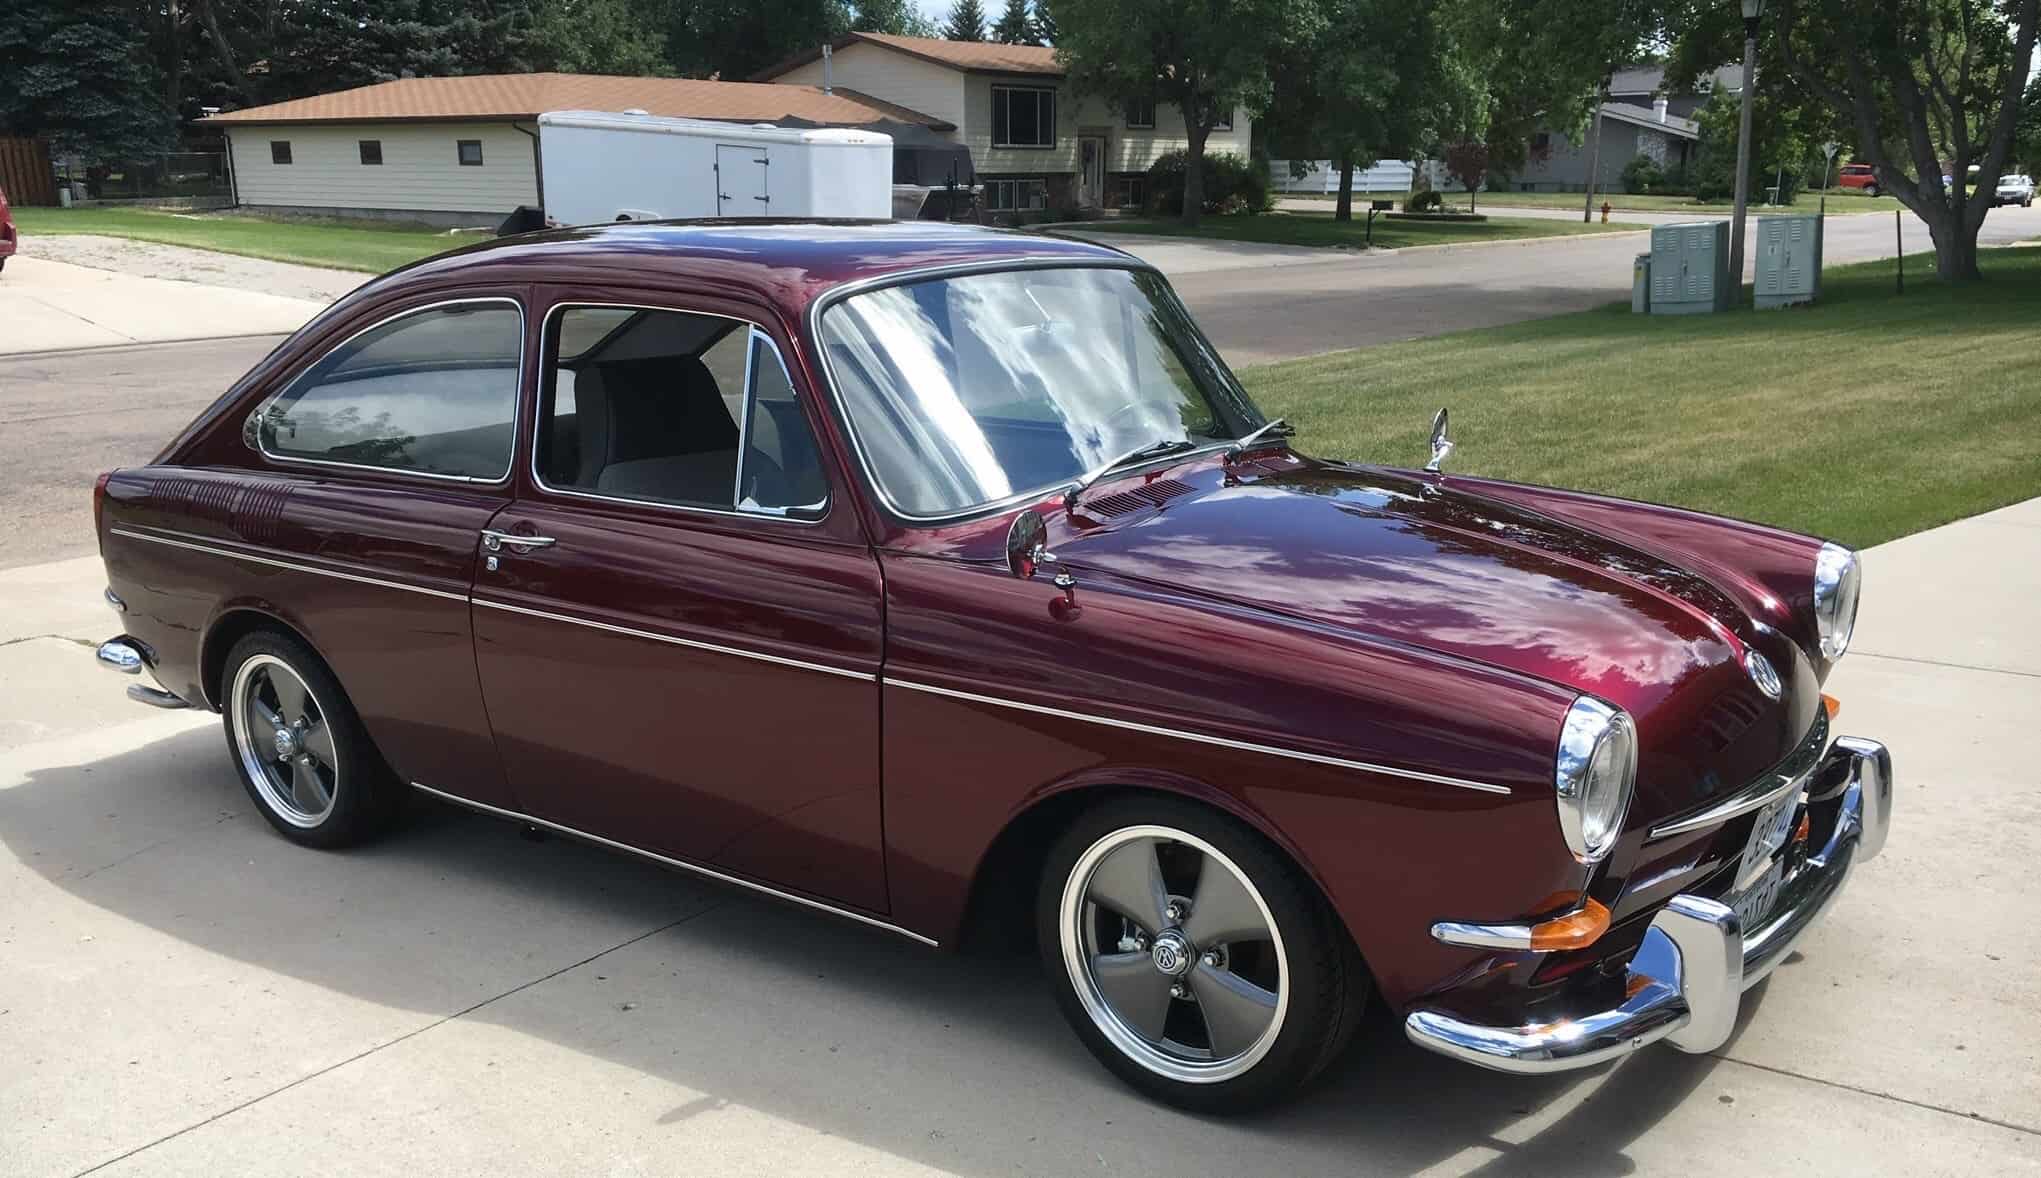 1967 Volkswagen Type 3, 38-year quest: Son restores Dad’s 1967 VW Type 3 Fastback, ClassicCars.com Journal